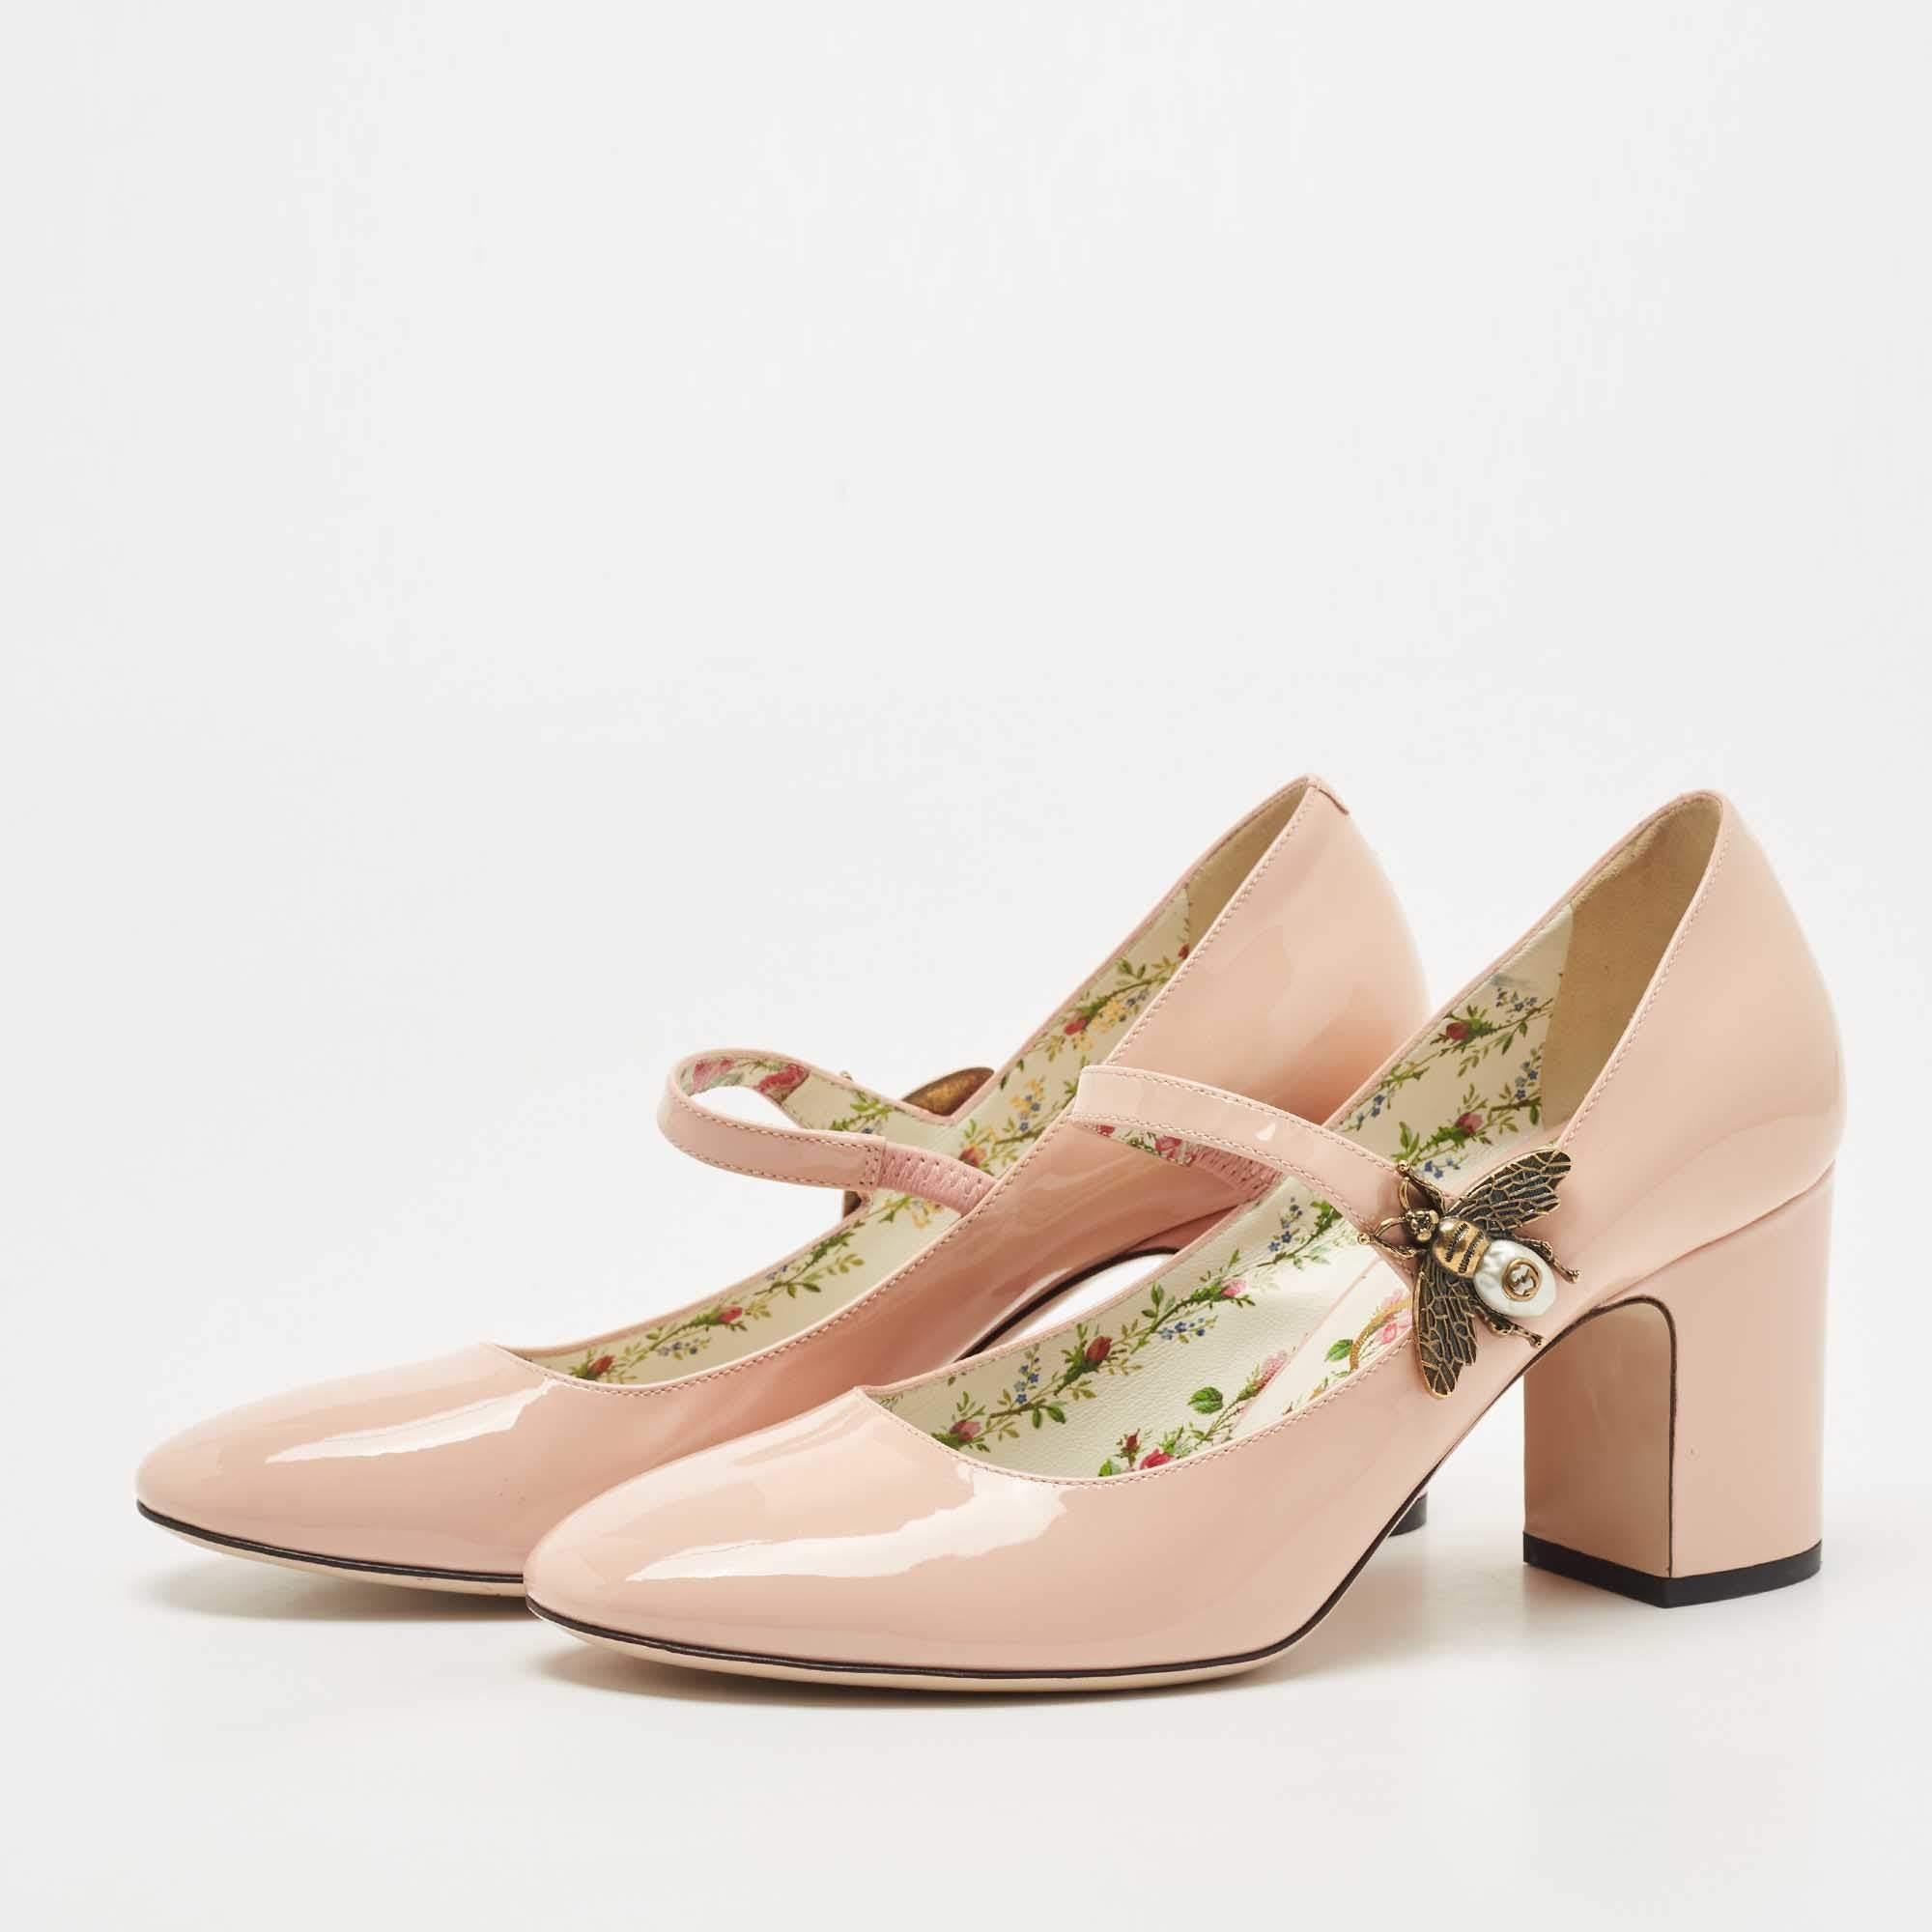 Complement your well-put-together outfit with these Mary Jane pumps by Gucci. Minimal and classy, they have an amazing construction for enduring quality and comfortable fit.

Includes: Original Box, Info Booklet